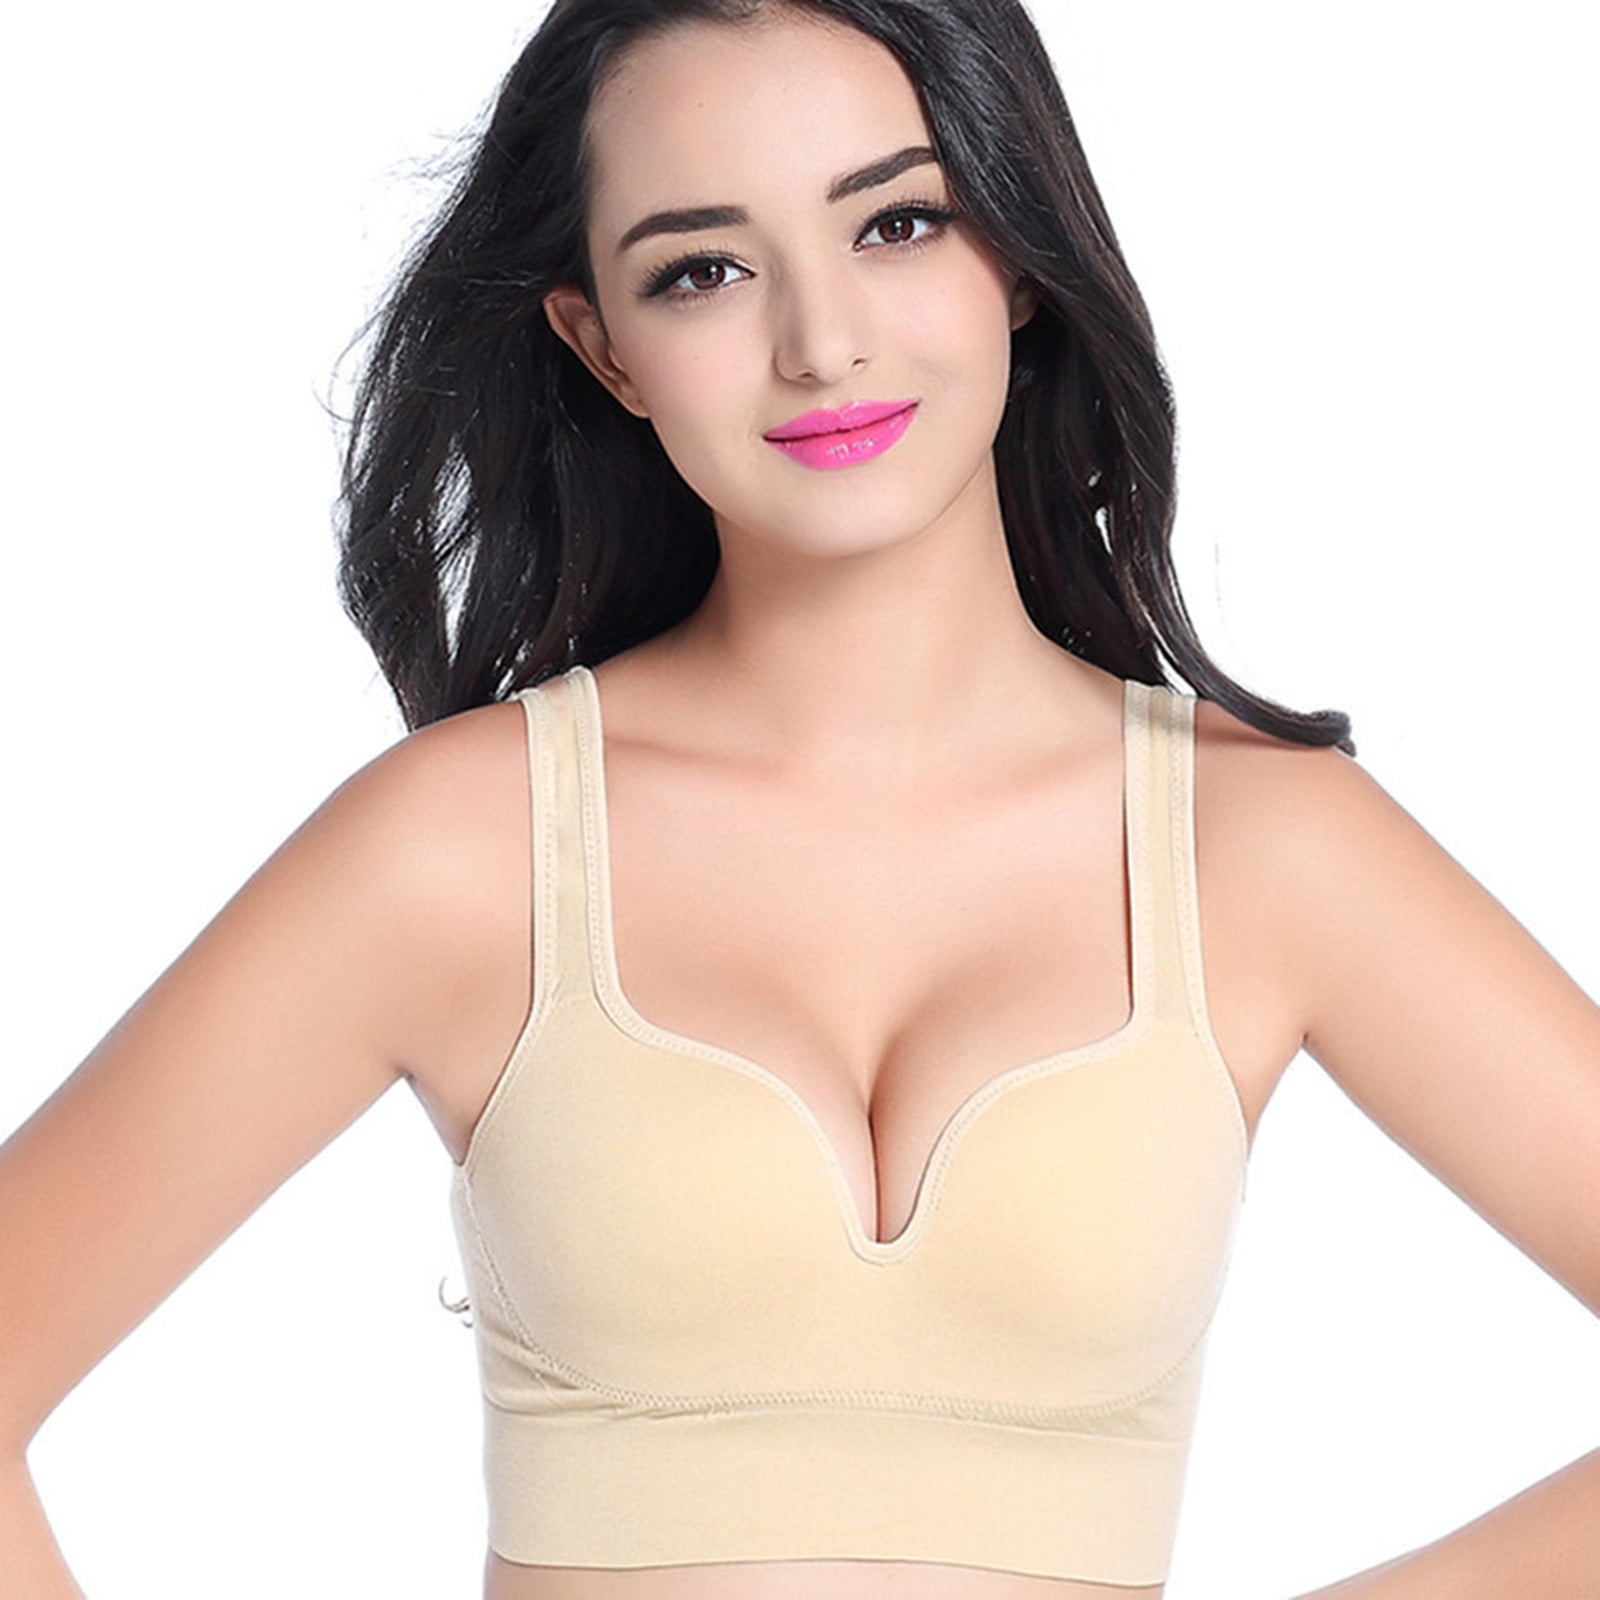 Clearance Deagia Pepper Bras for Women Small Breast Daily Push Up Bra Soft  Seamless Deep V Bras Drawstring Bras Y-Back U-Neck Bralettes Gray 38/D #46  